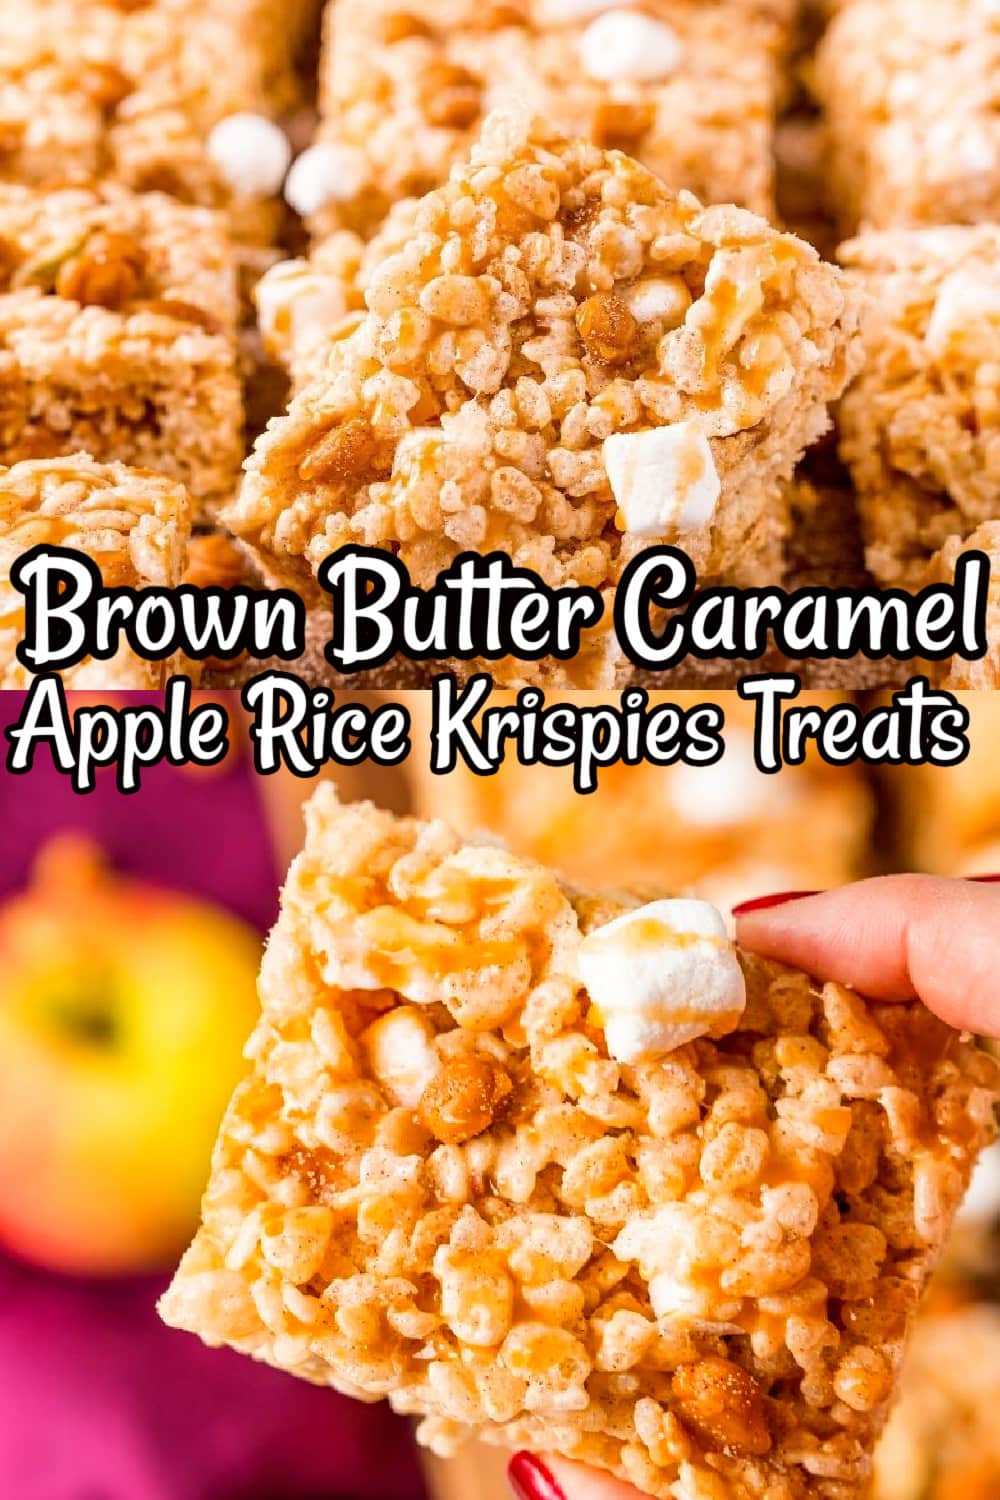 The title Brown Butter Caramel Apple Rice Krispies Treats in black and white lettering.